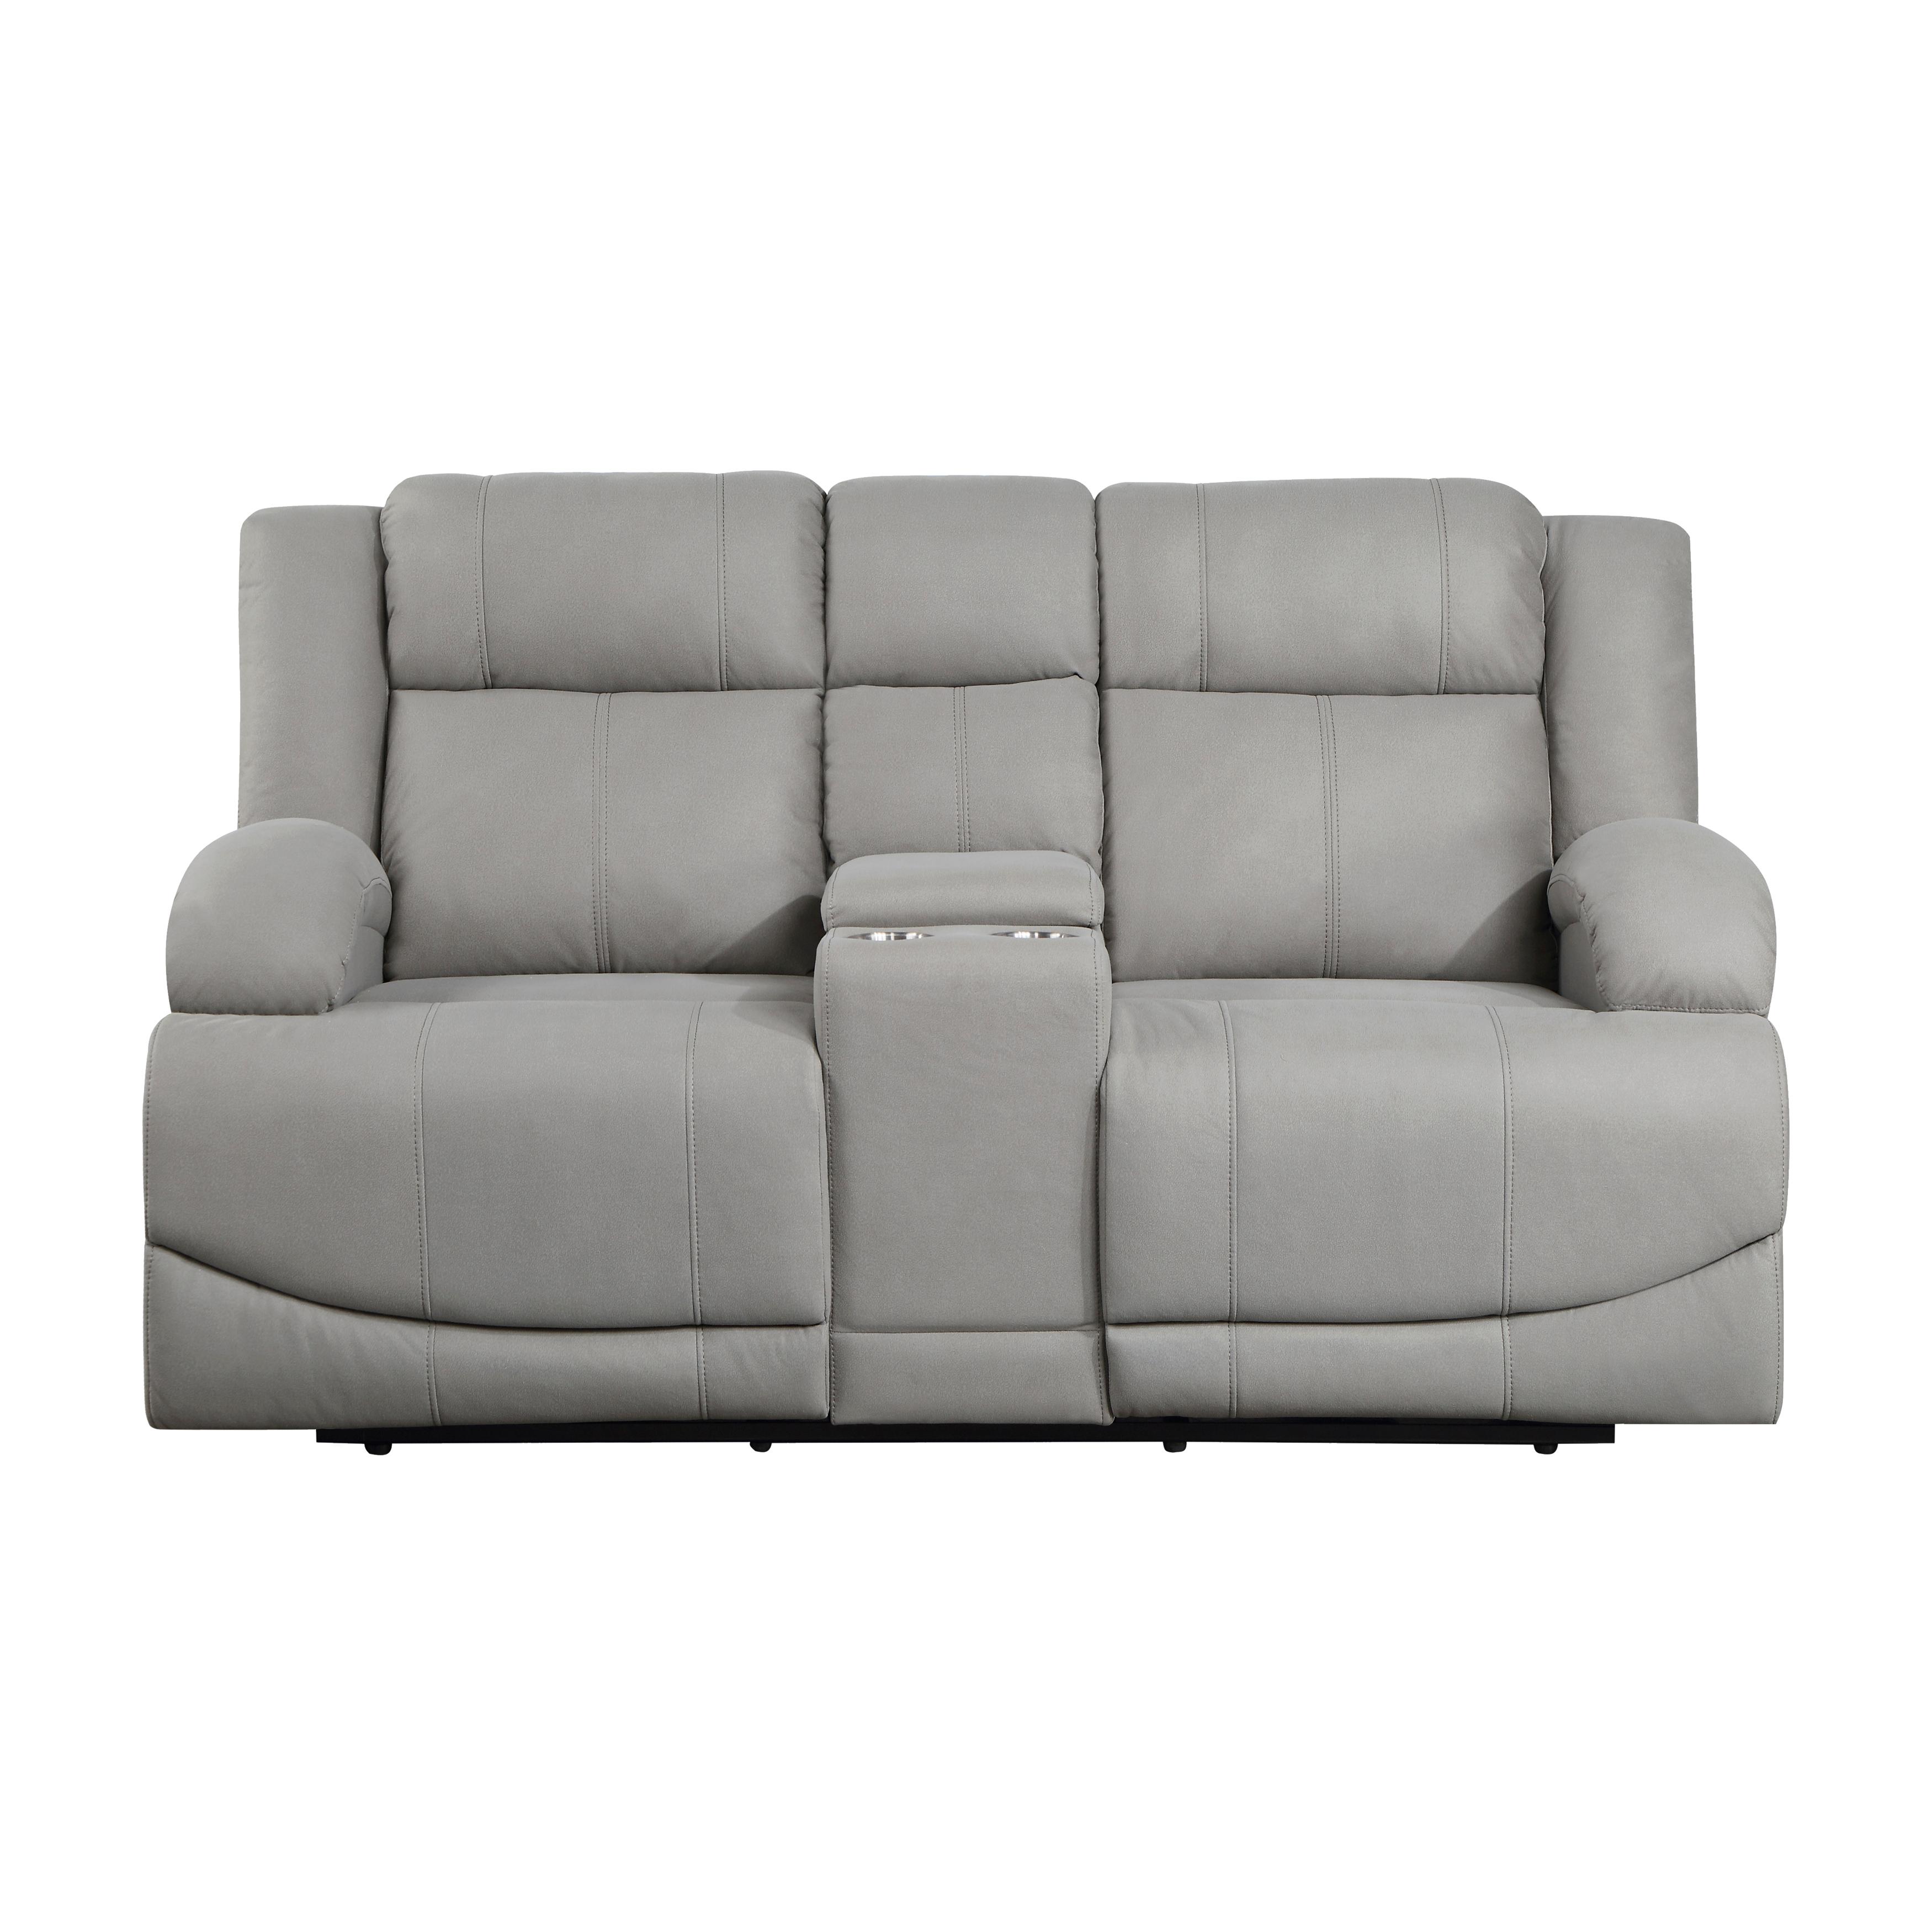 Transitional Power Reclining Loveseat 9207GRY-2PW Camryn 9207GRY-2PW in Gray Microfiber